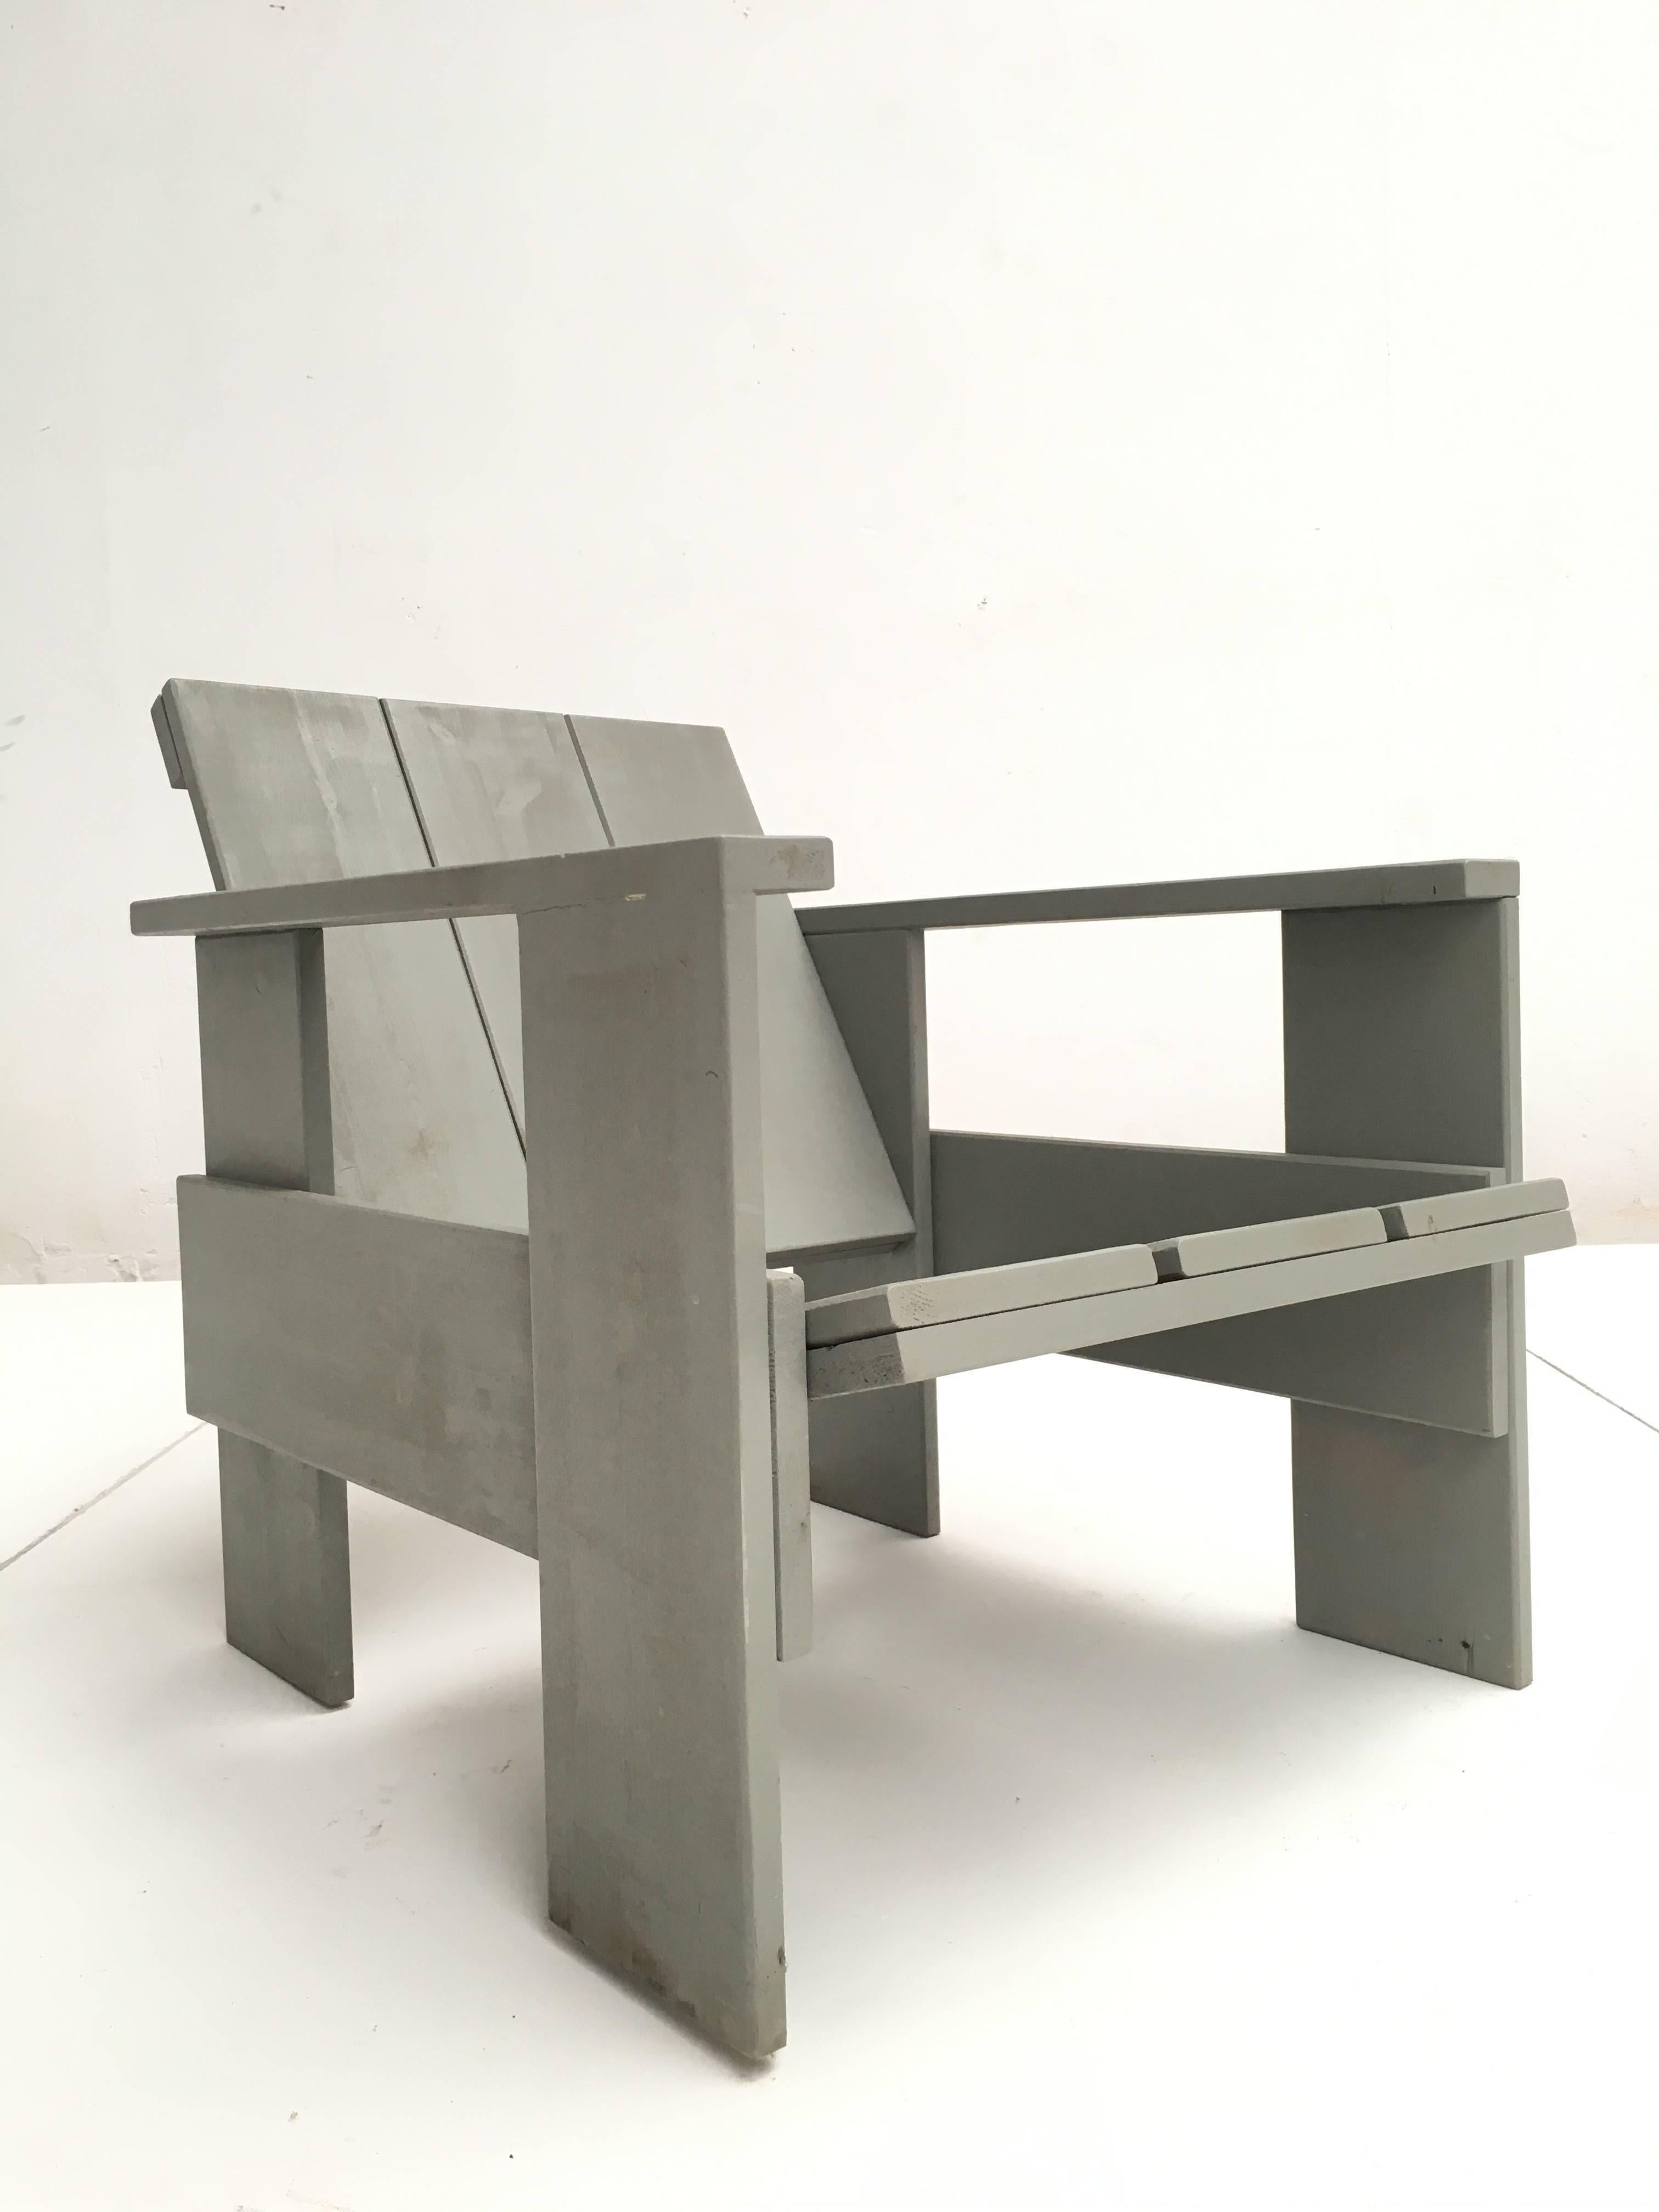 Rietveld put a big stamp on Dutch Design history and still inspires many young students of design and carpenter and woodwork courses to build their own Rietveld chair during their study time

This example was made during the last decade and is not